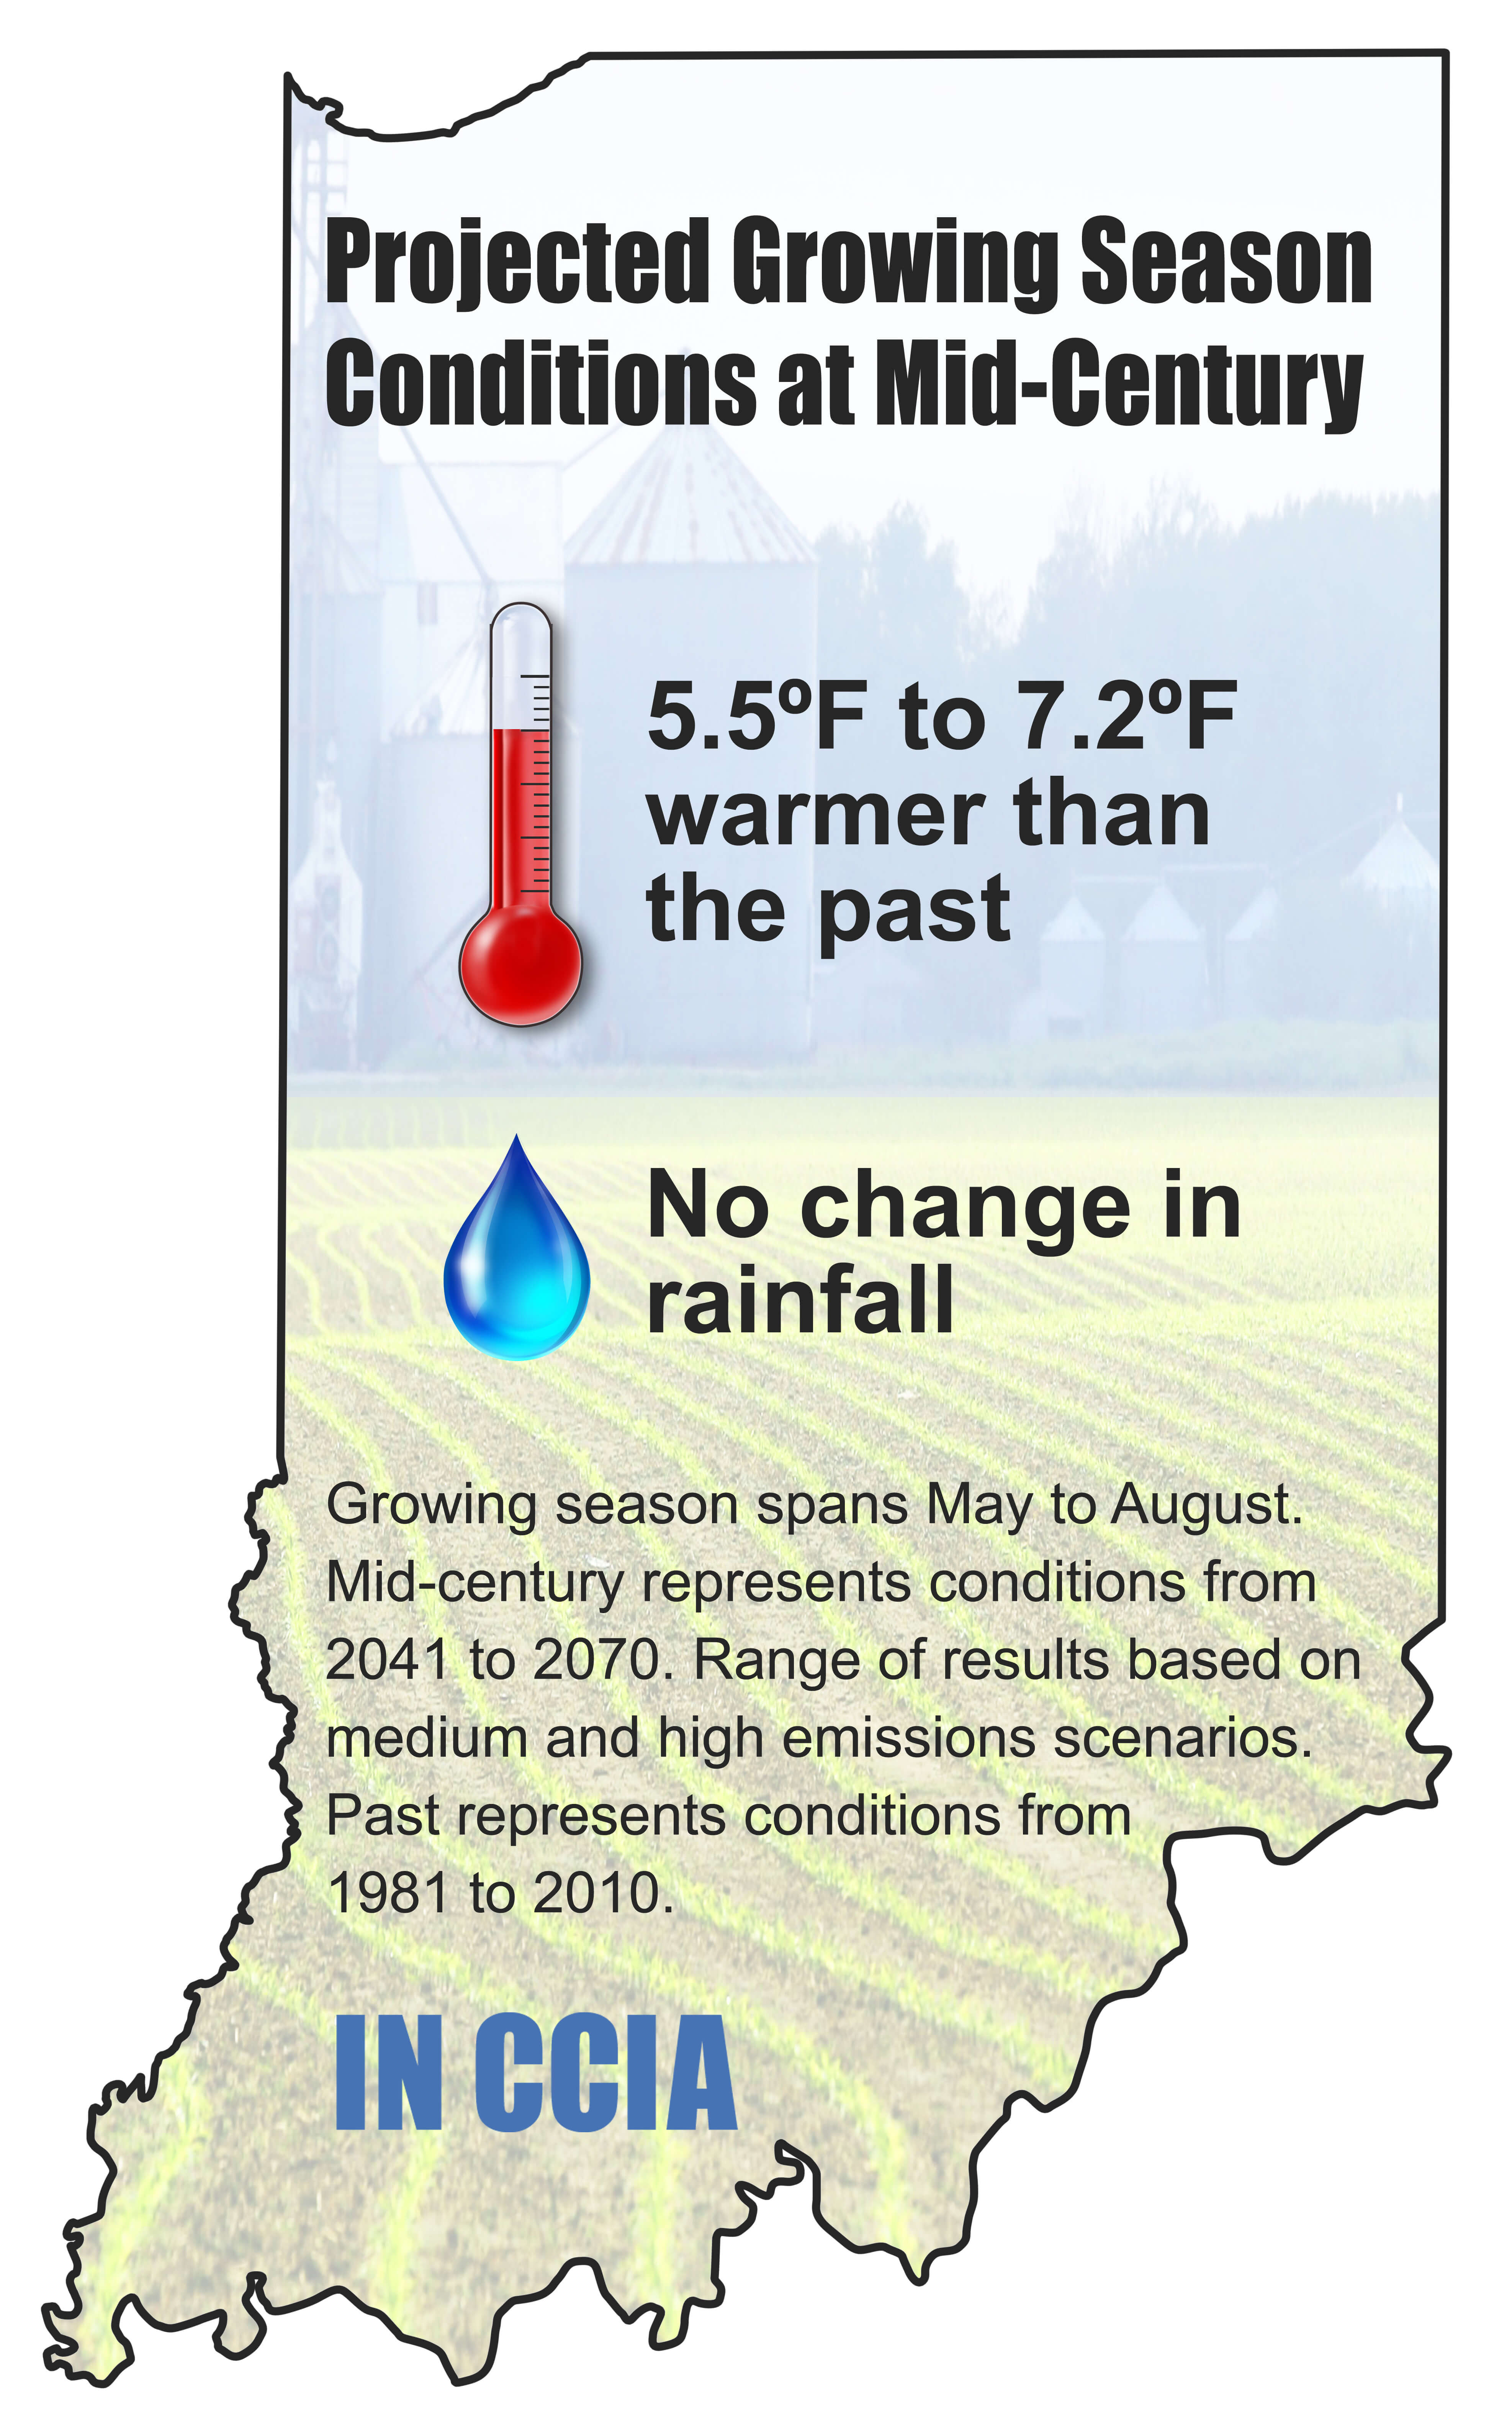 Projected growing season conditions at mid-century